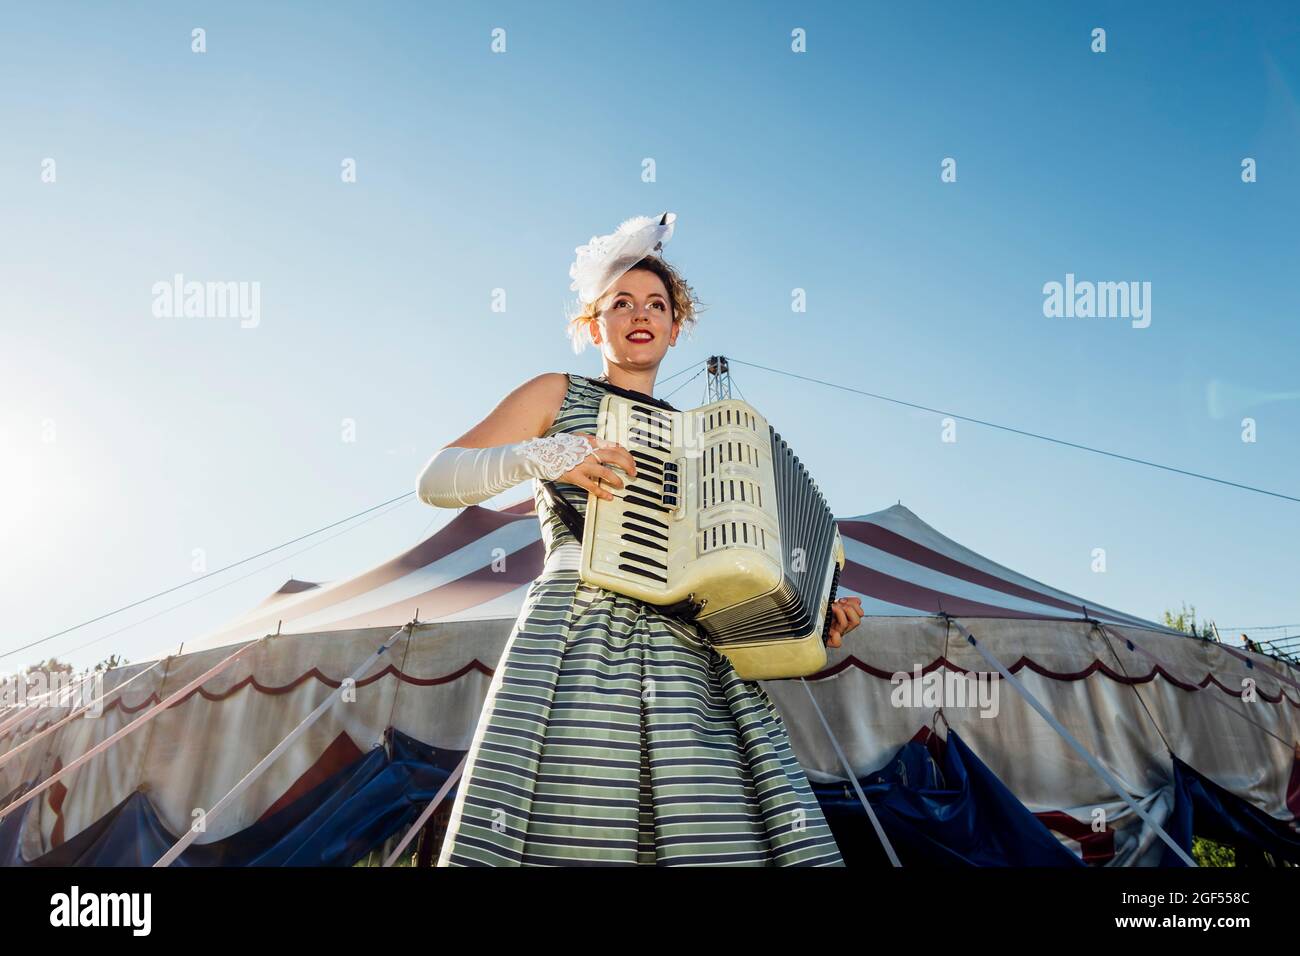 Female performer playing accordion in front of circus tent Stock Photo